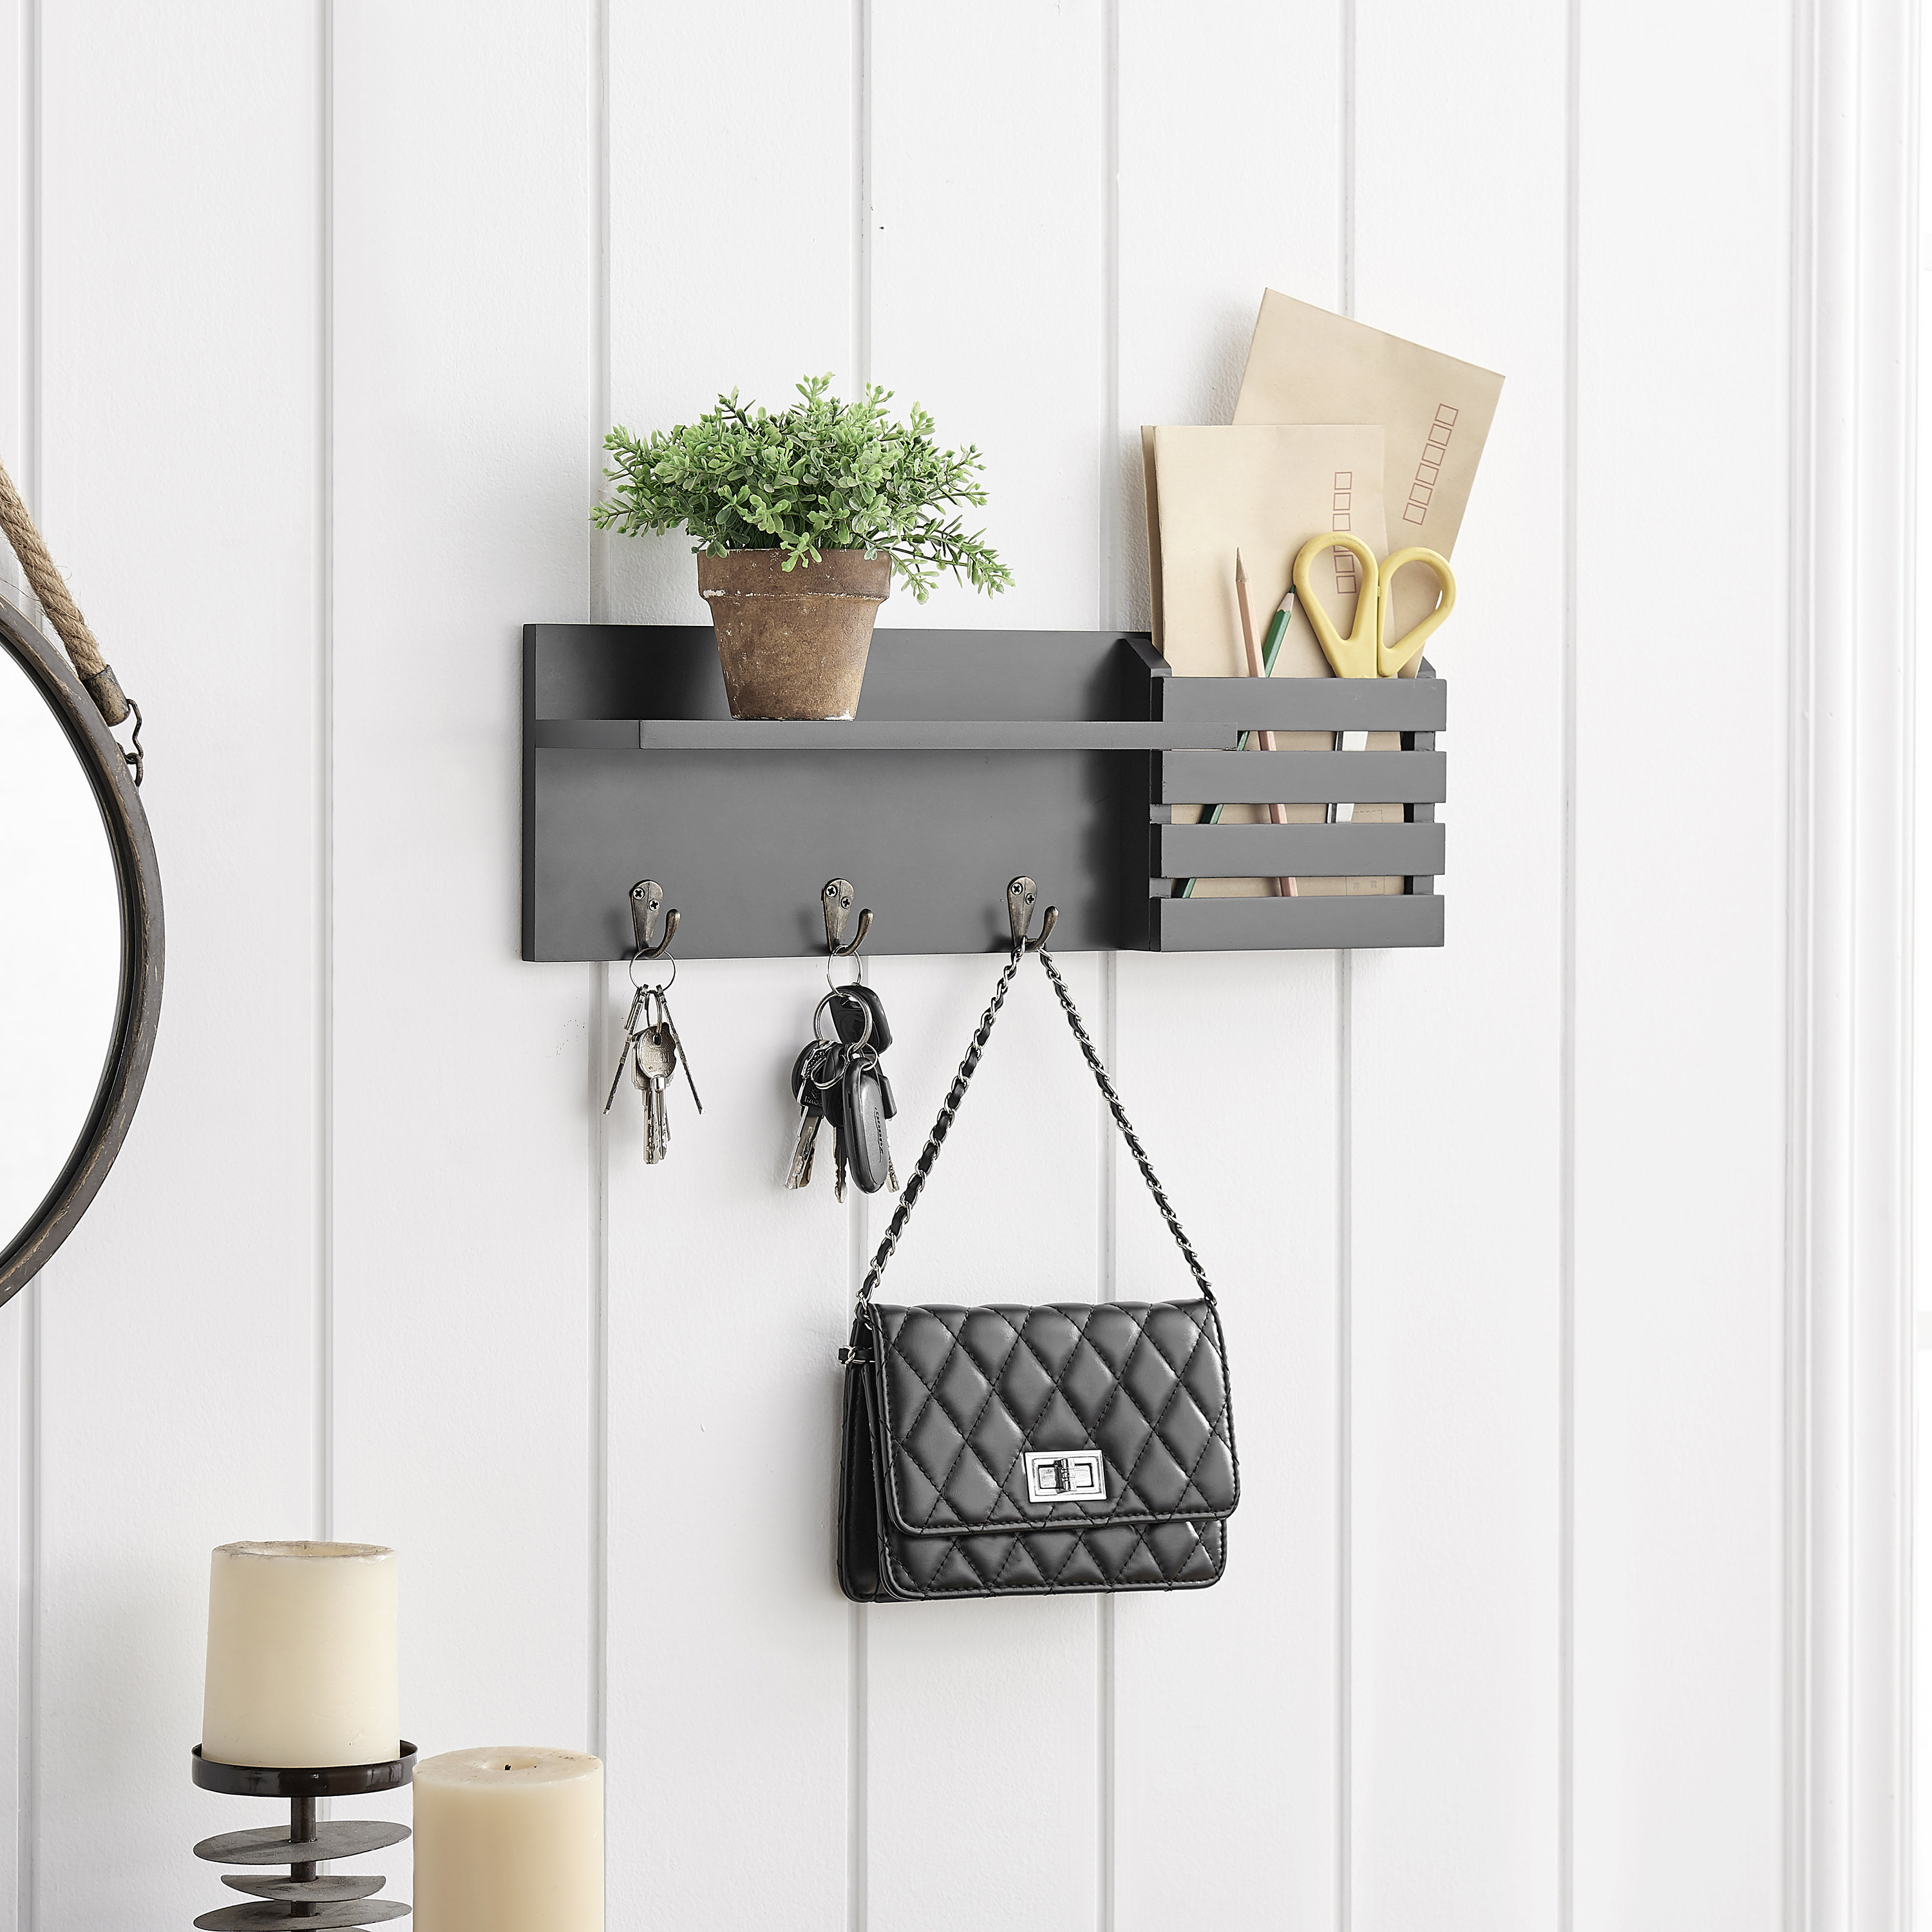 Key Holder for Wall, Mail Organizer Wall Hanging Key Rack, White, Wooden,  5-Hook